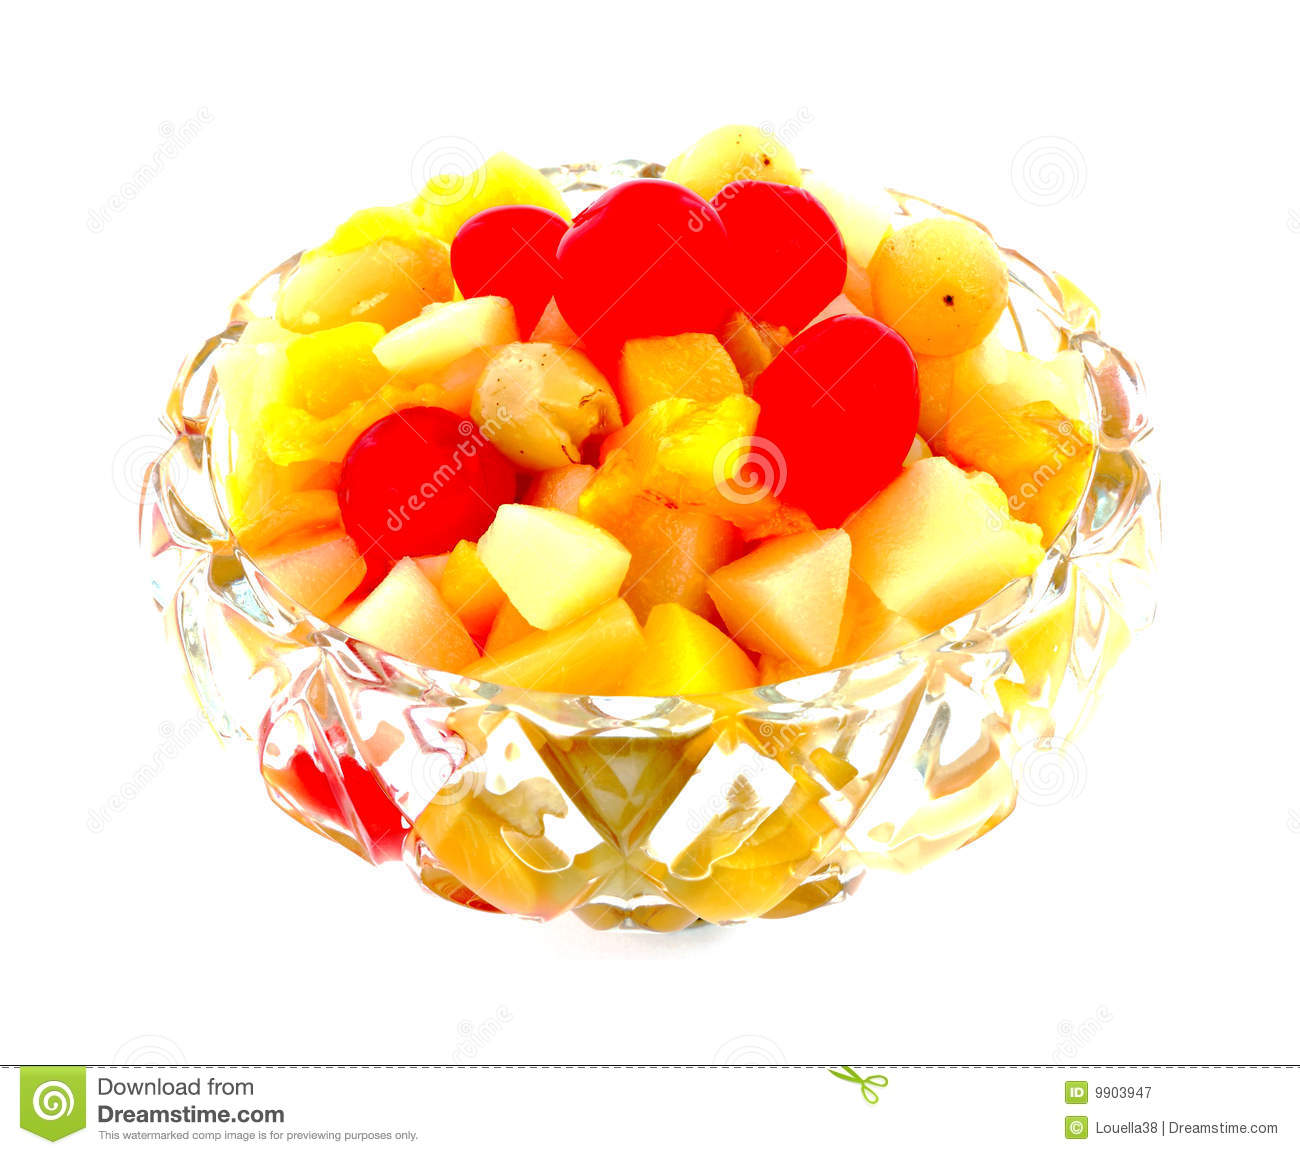 Canned Fruit Bowl Royalty Free Stock Photography   Image  9903947